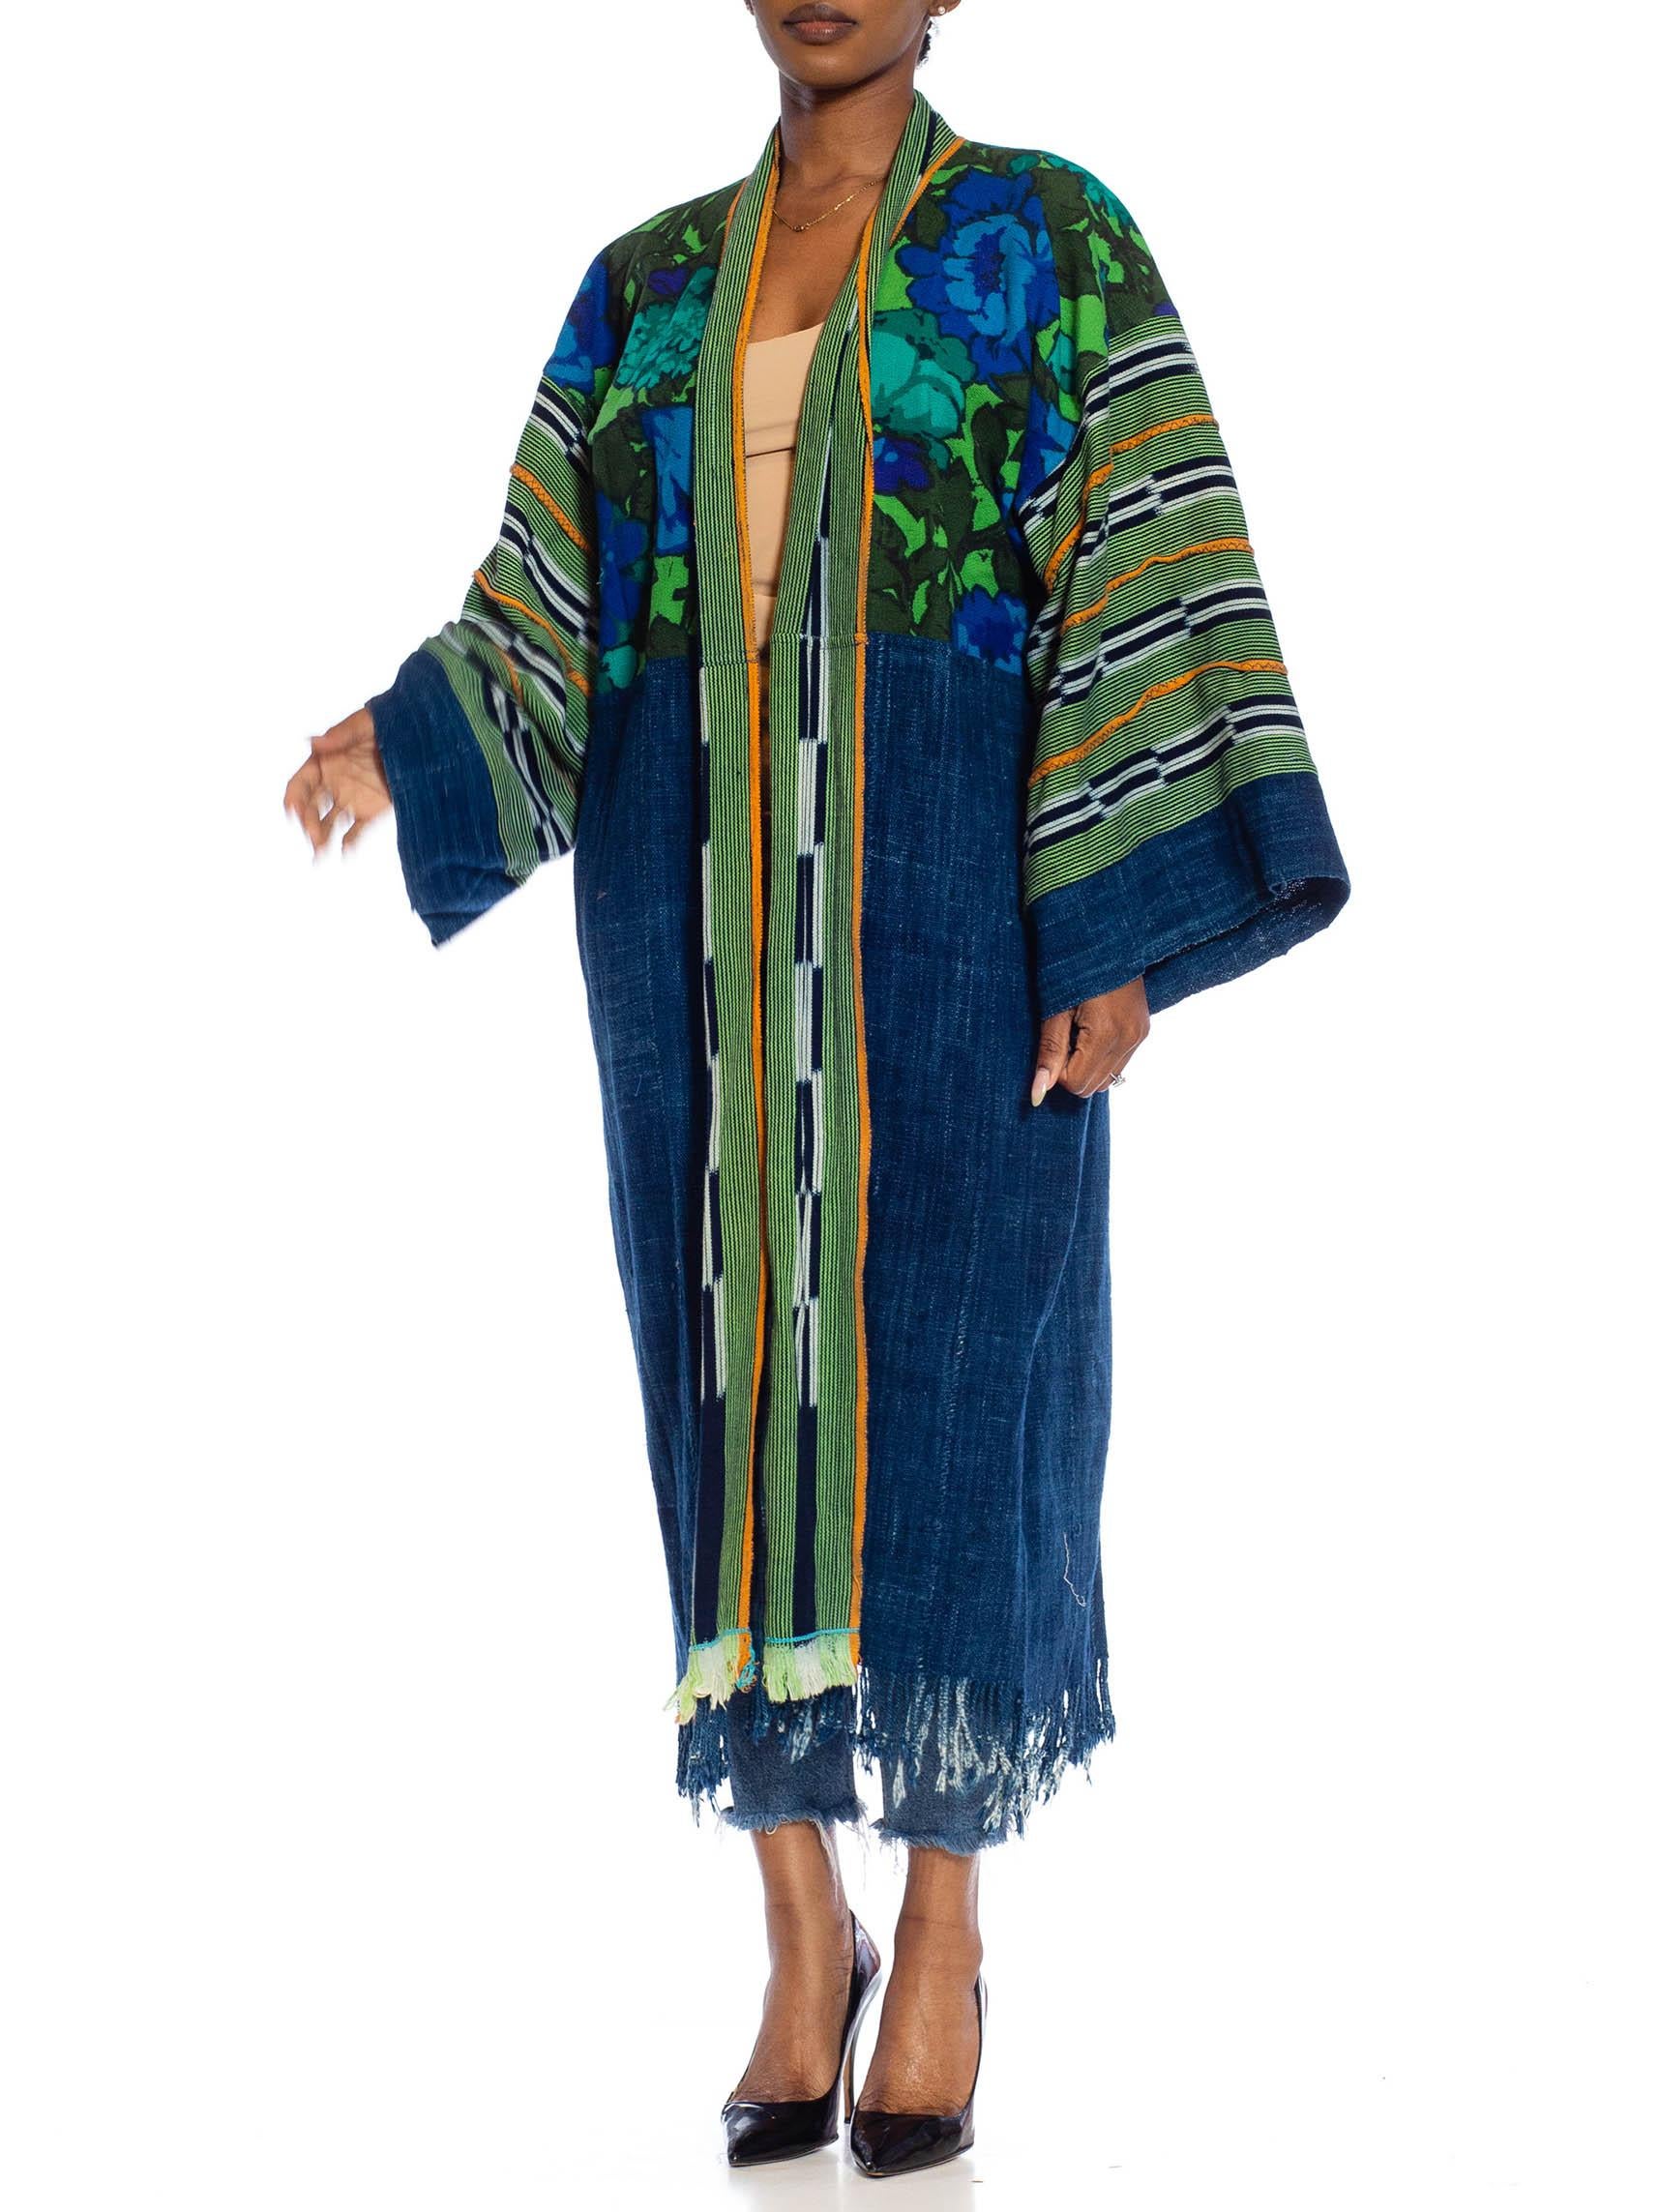 Women's or Men's MORPHEW COLLECTION Navy Blue & Green African Cotton Vintage 1960S Floral Duster